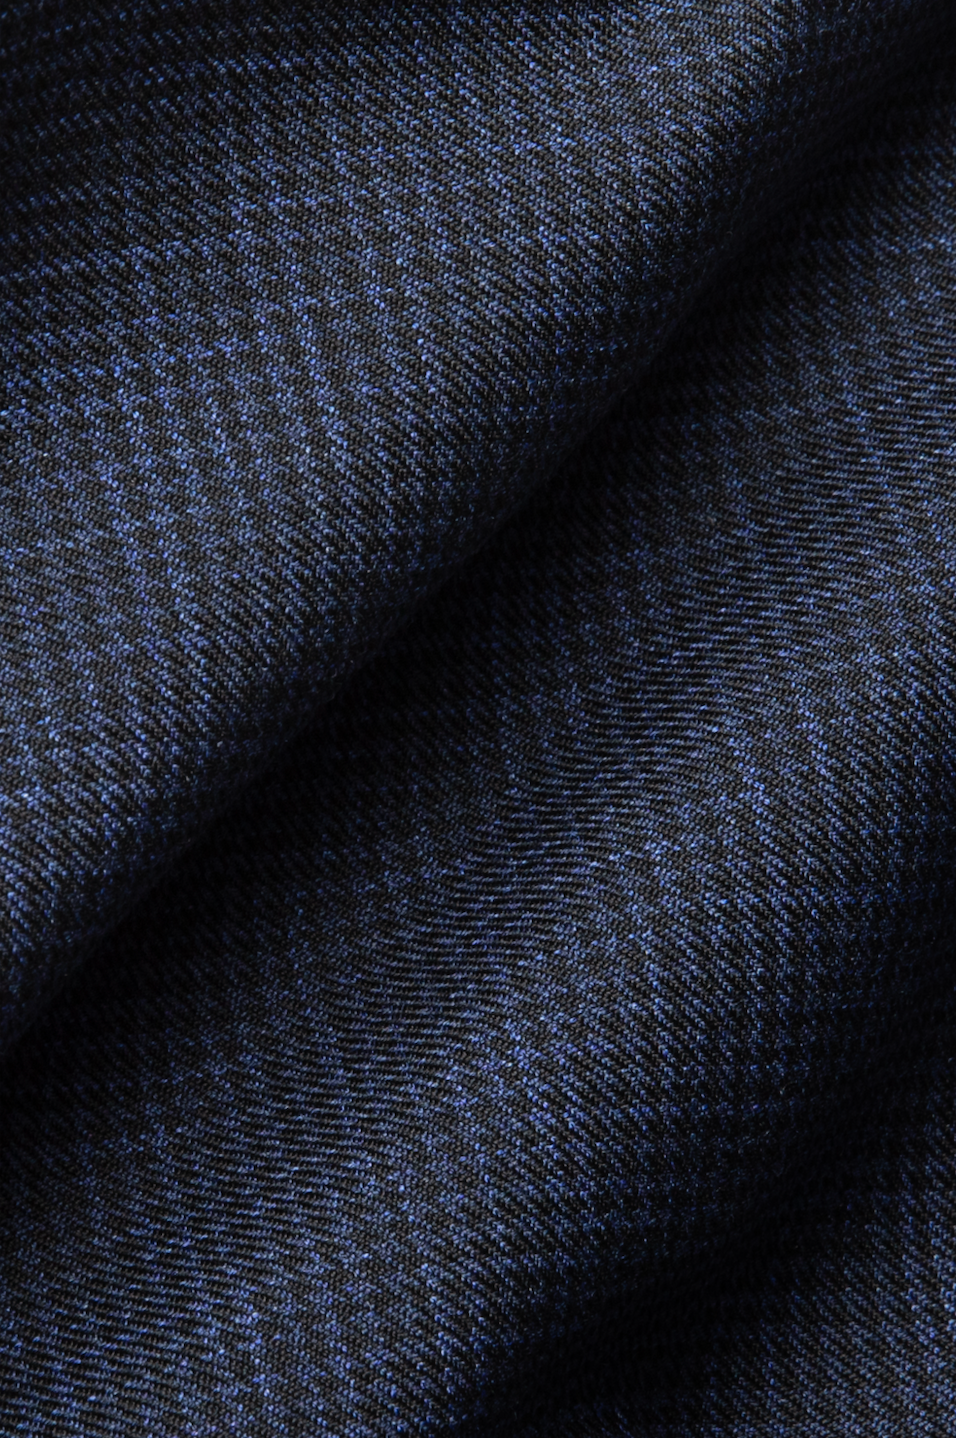 Navy Houndstooth FLEXO Trousers